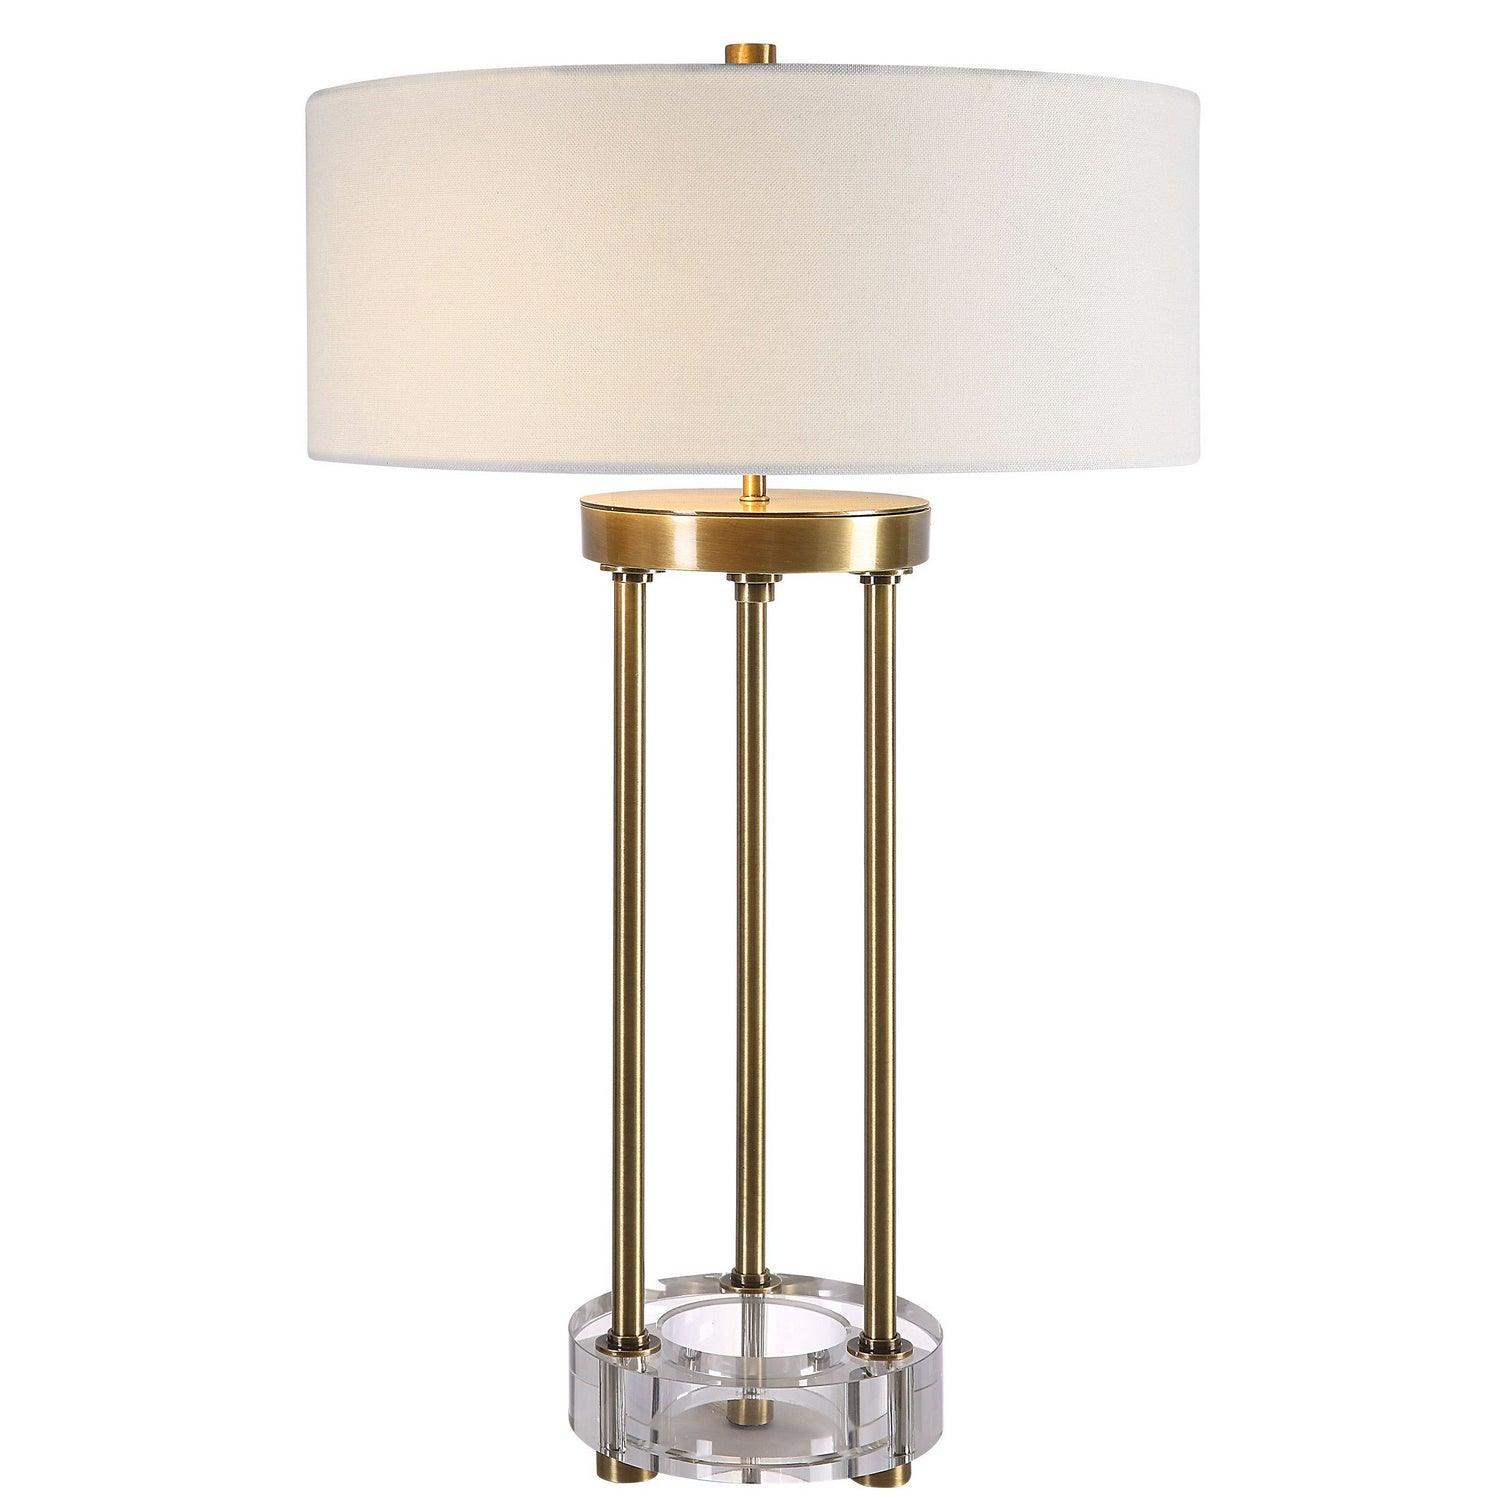 The Uttermost - Pantheon Table Lamp - 30013-1 | Montreal Lighting & Hardware